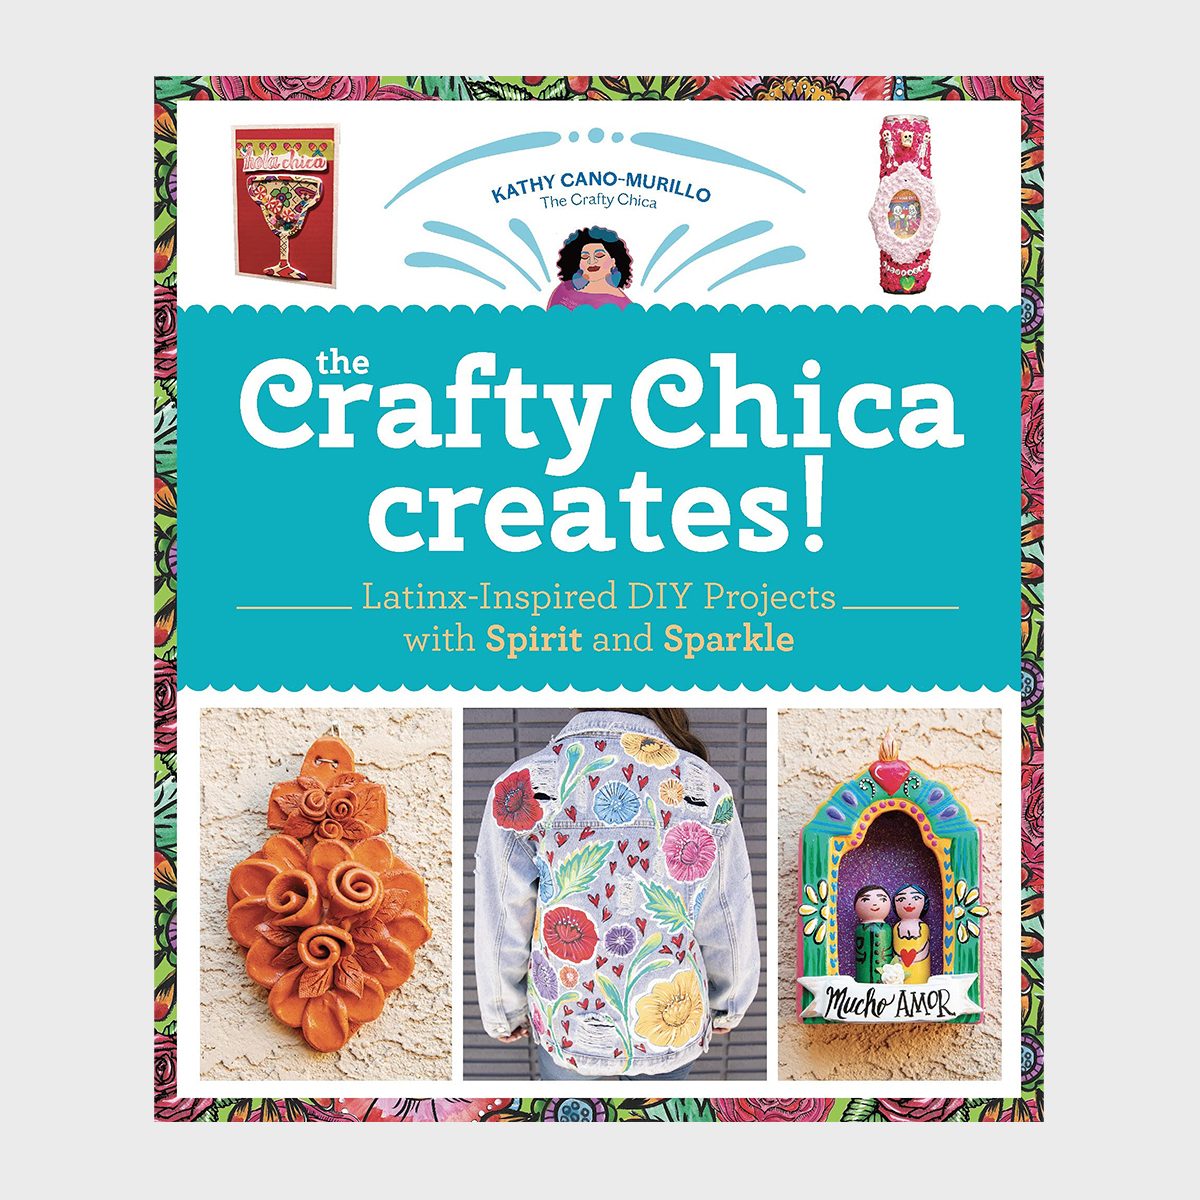 The Crafty Chica Creates By Kathy Cano Murillo